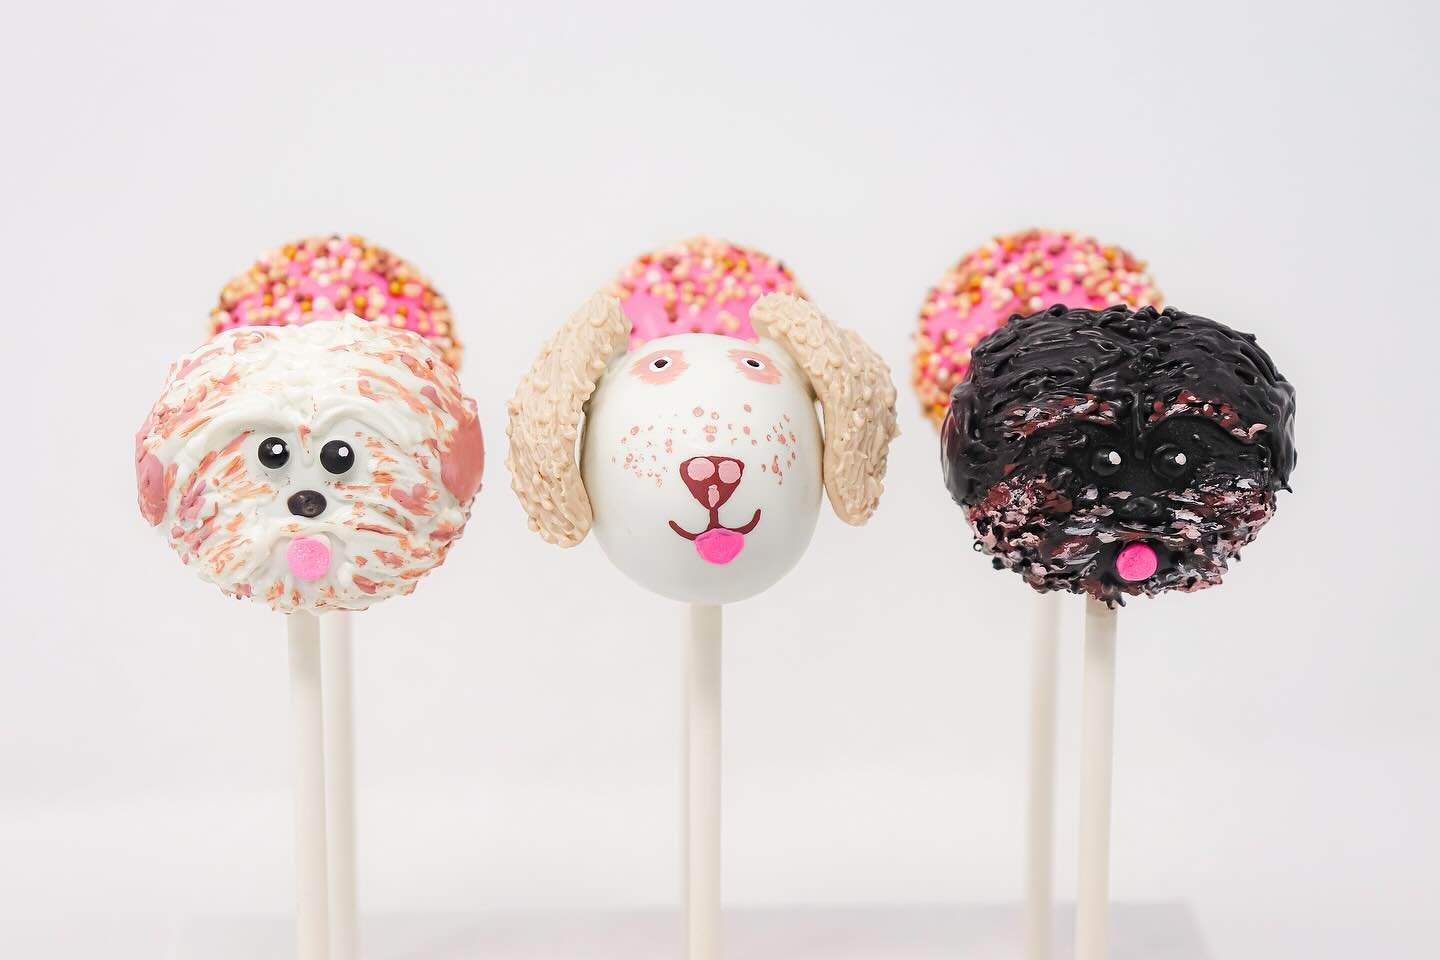 Barking up the right tree with these adorable dog-themed Cake Pops! 🐾🍰 Indulge in some puppy love with every bite!
~~~
#cakepop #katespoperella #sweettreats #handmade #cute
#cakepopsofinstagram #dogs #cakepops #bakery #yum
#homebaker #bismarcknd #m